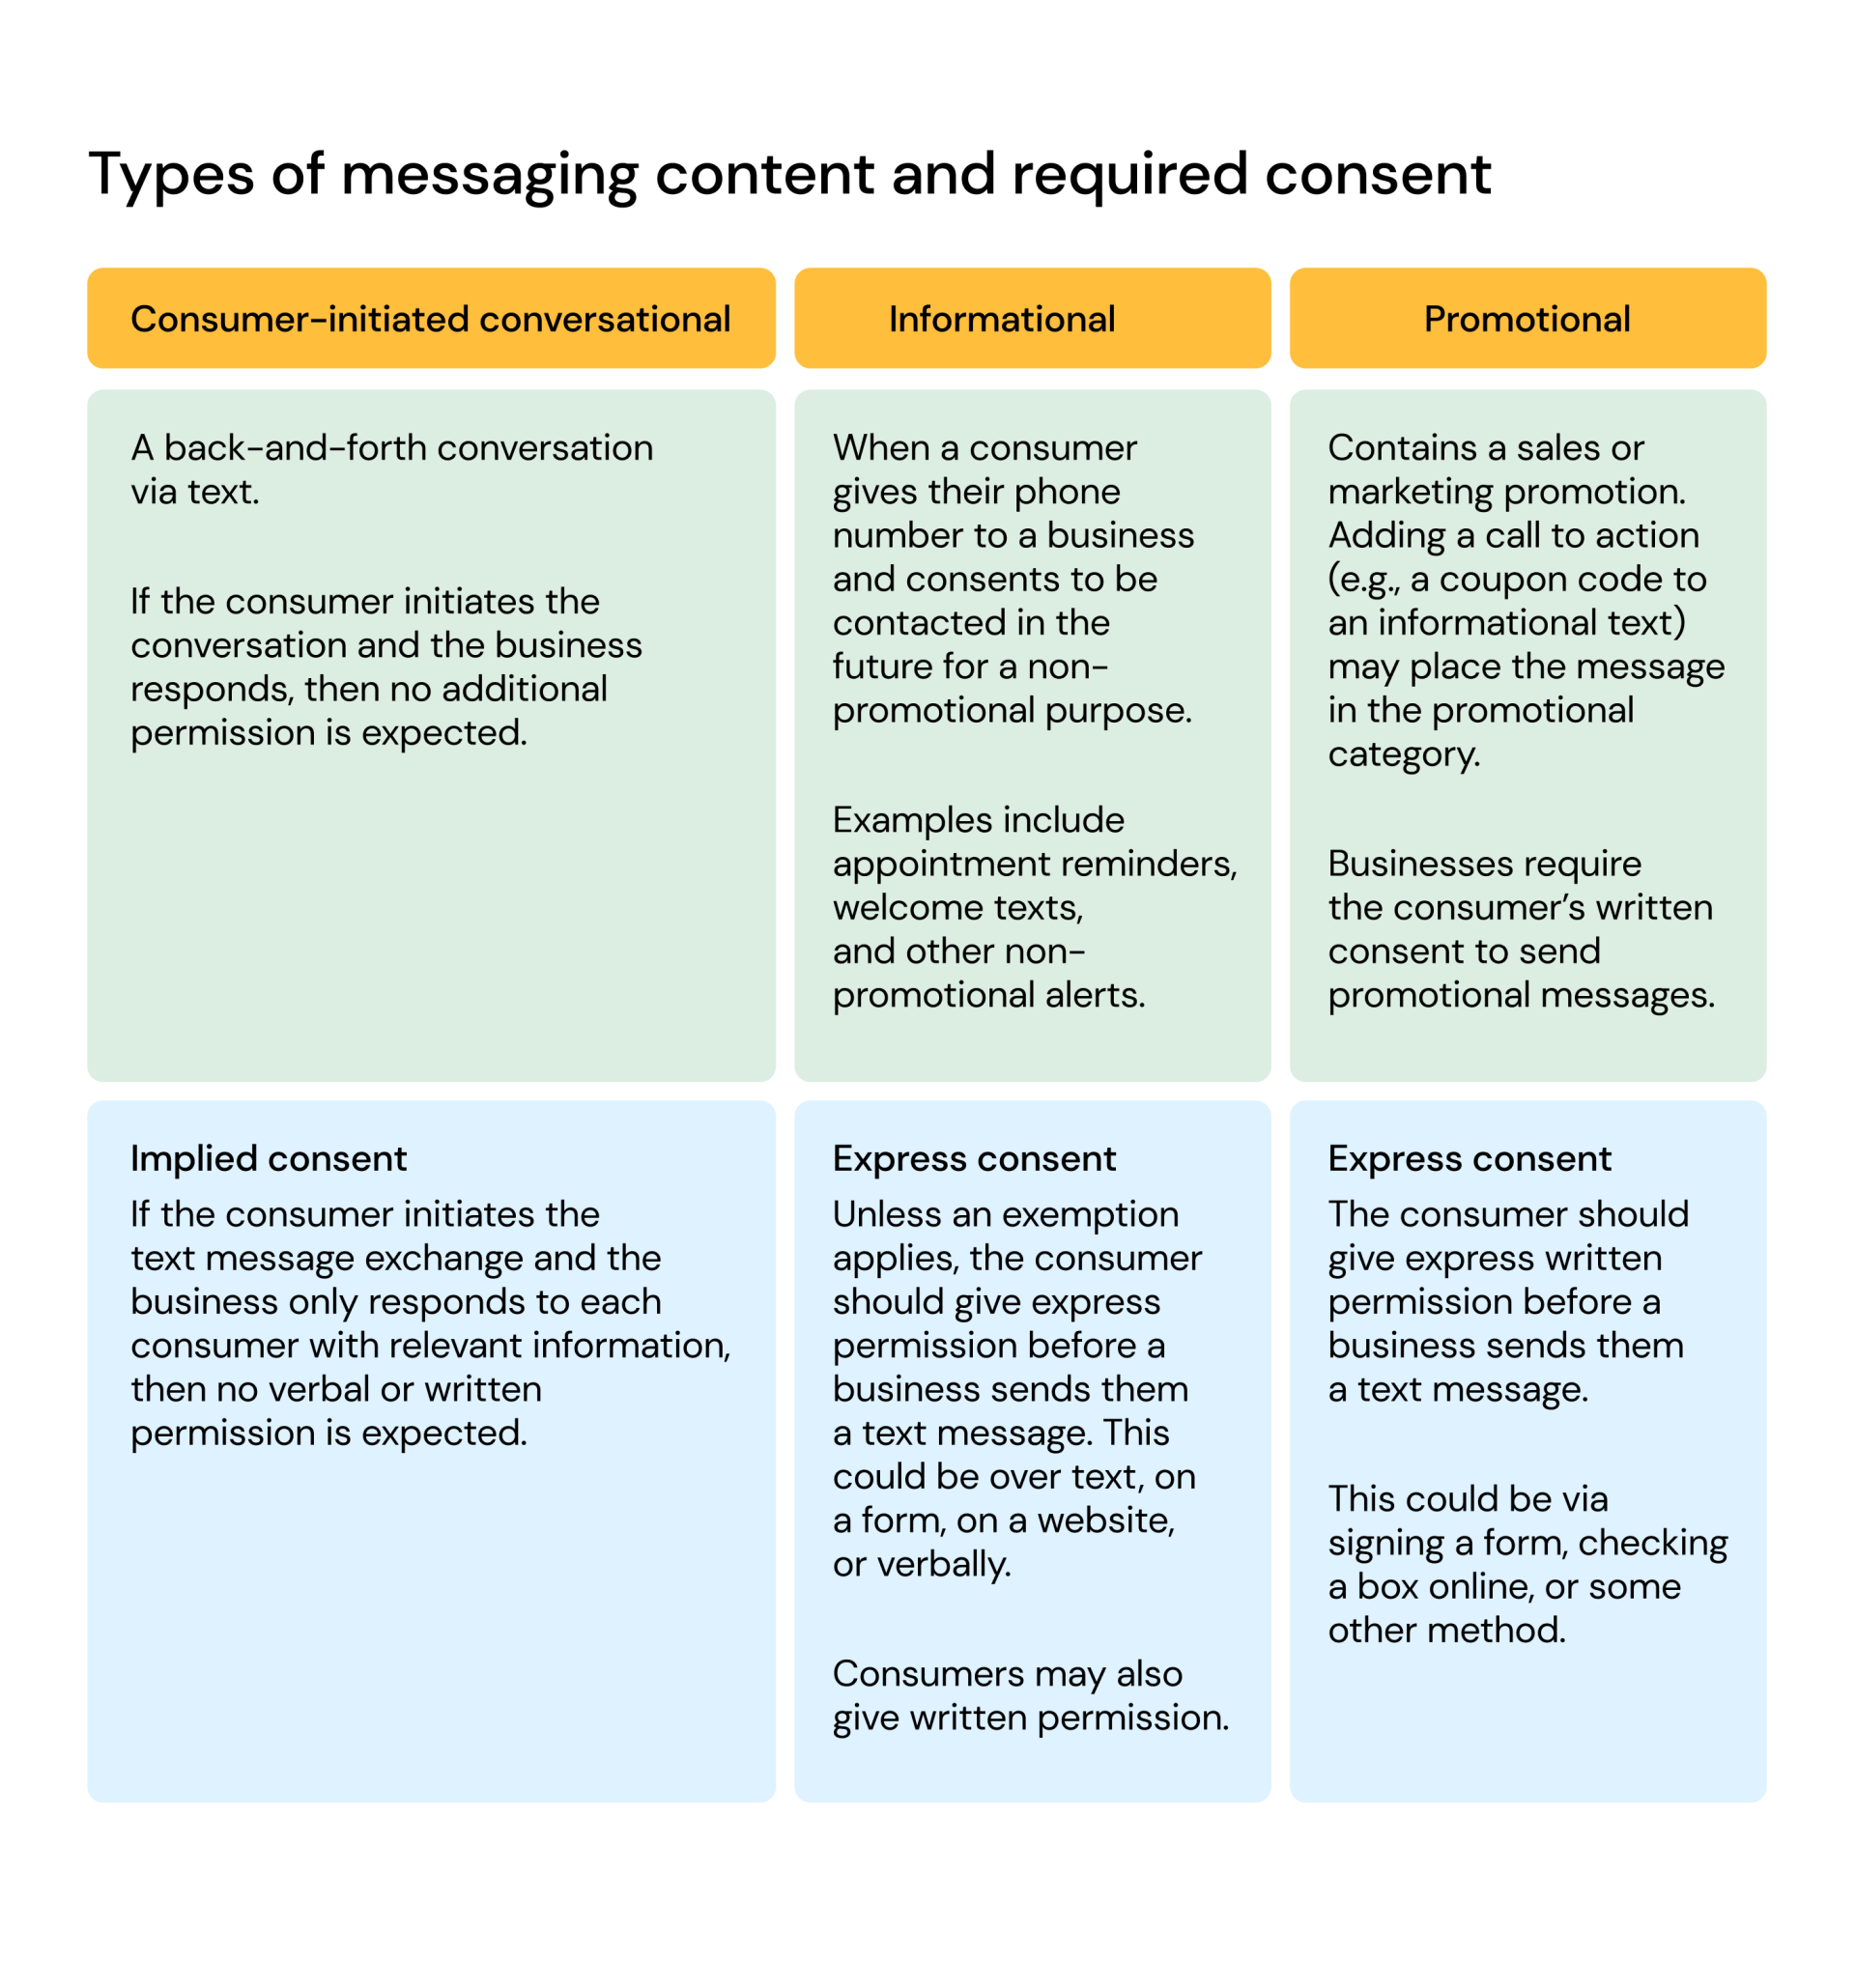 Heightened SMS Consent Requirements Take Effect October 16, 2013